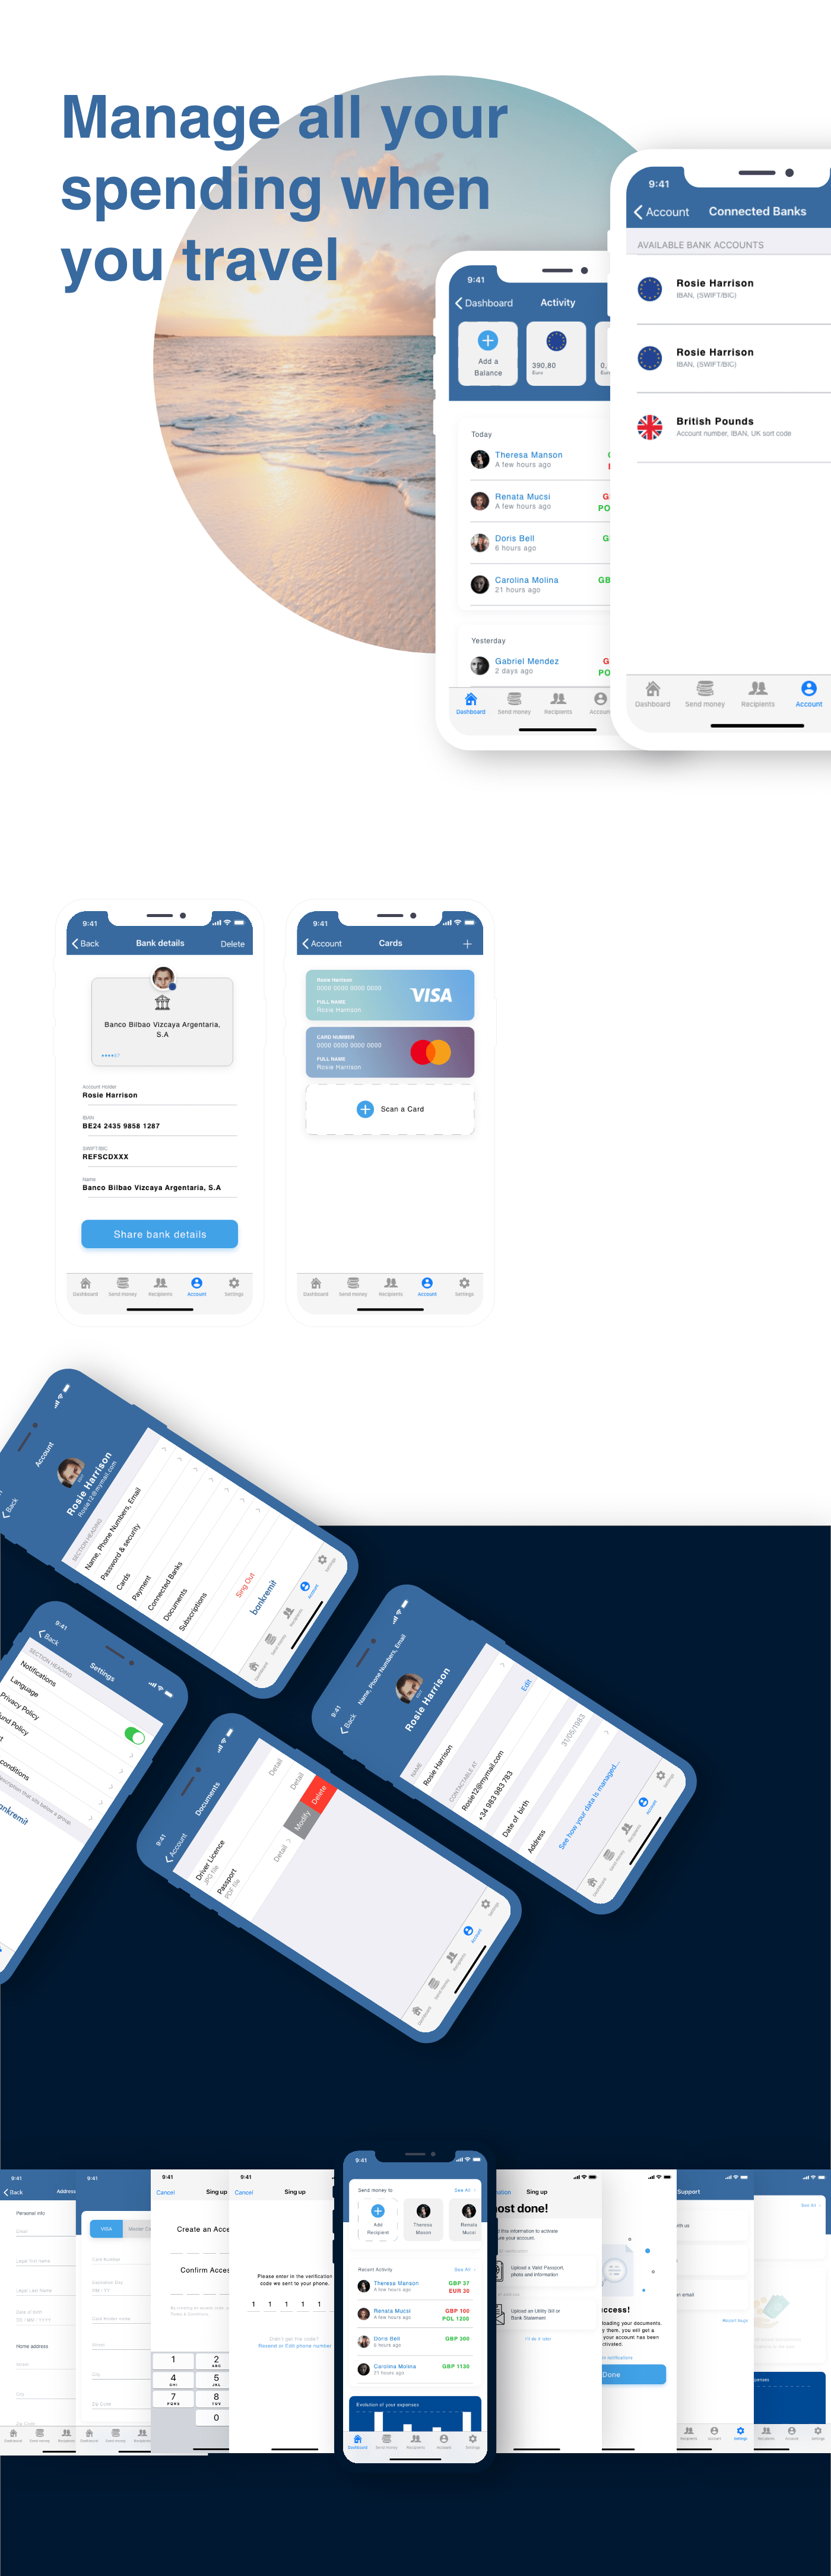 ai Bank design interactive ios iphone mobile UI user experience wireframe